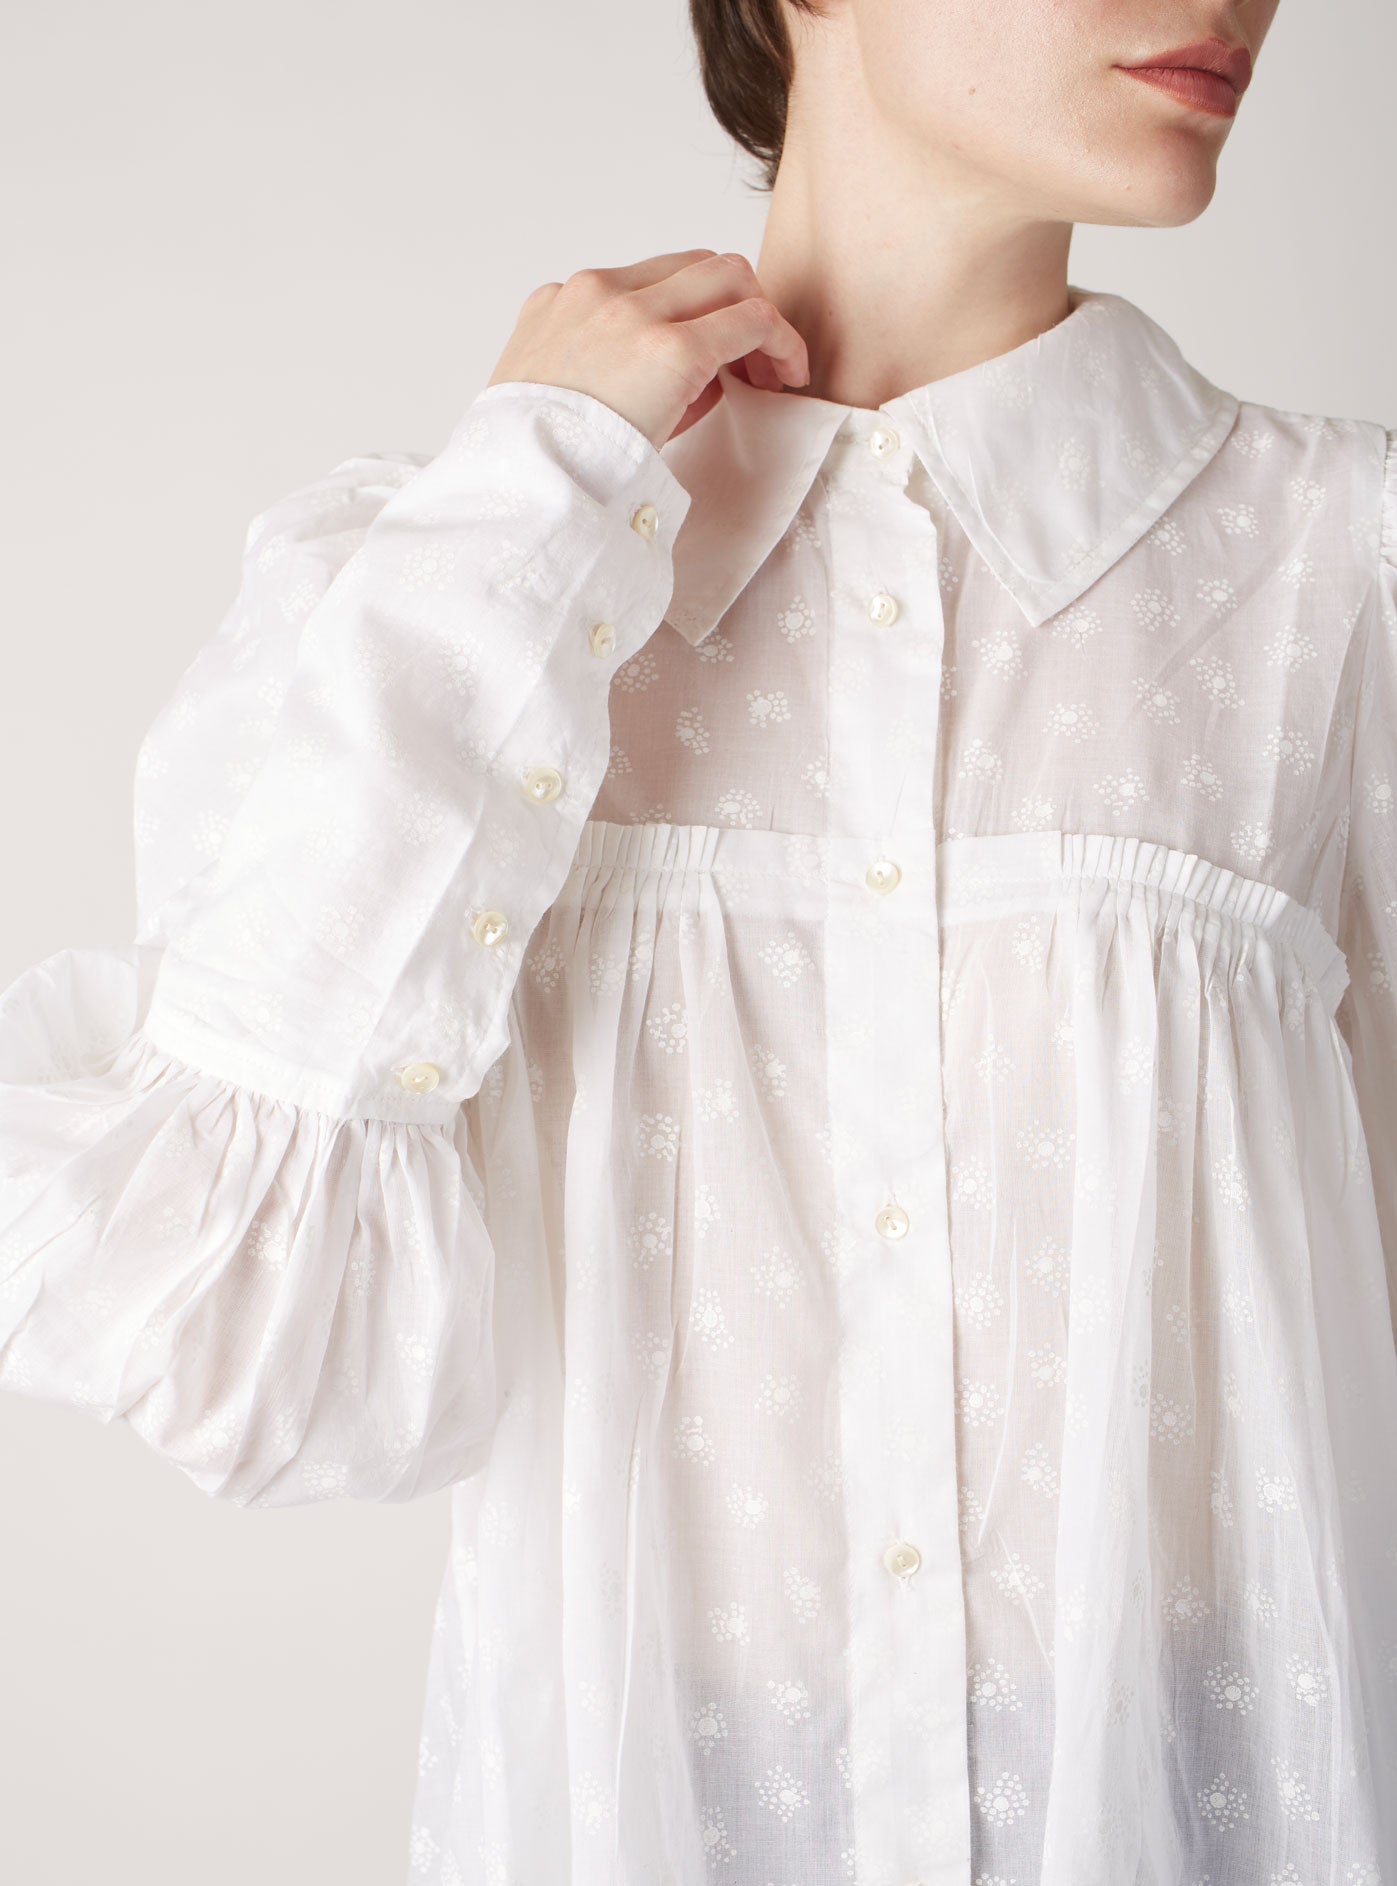 Detail of the sleeve - Wallis Victorian Dots Print White on White Blouse by Thierry Colson